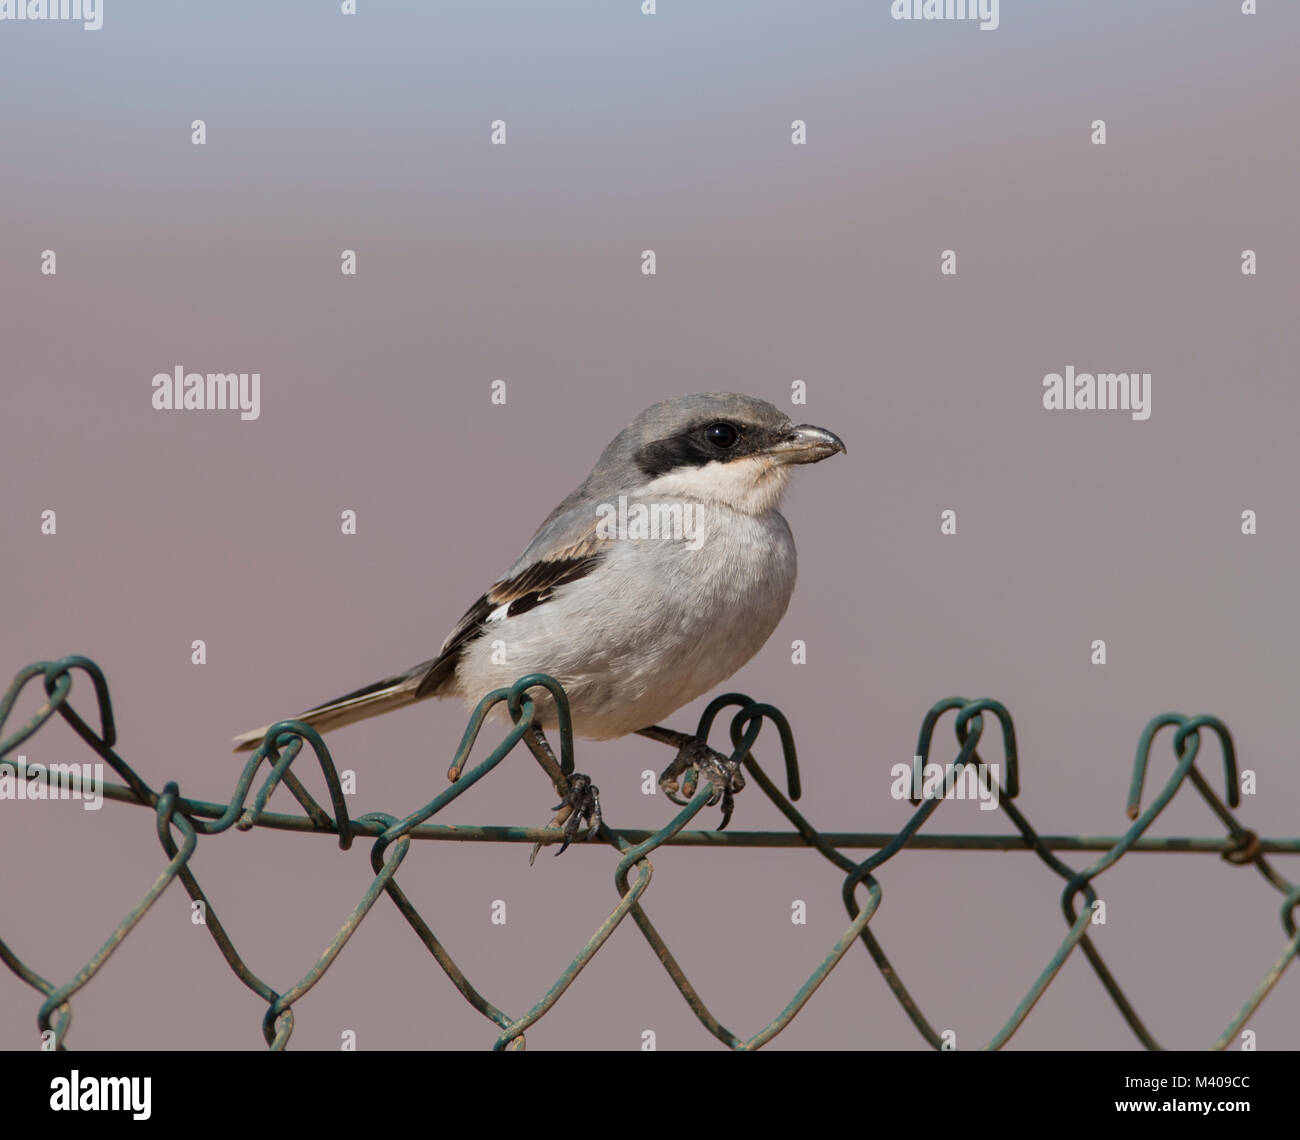 Southern Grey Shrike (Lanius meridionalis) on the Canary Island Fuerteventura Spain sat on a wire fence in full sun. Stock Photo